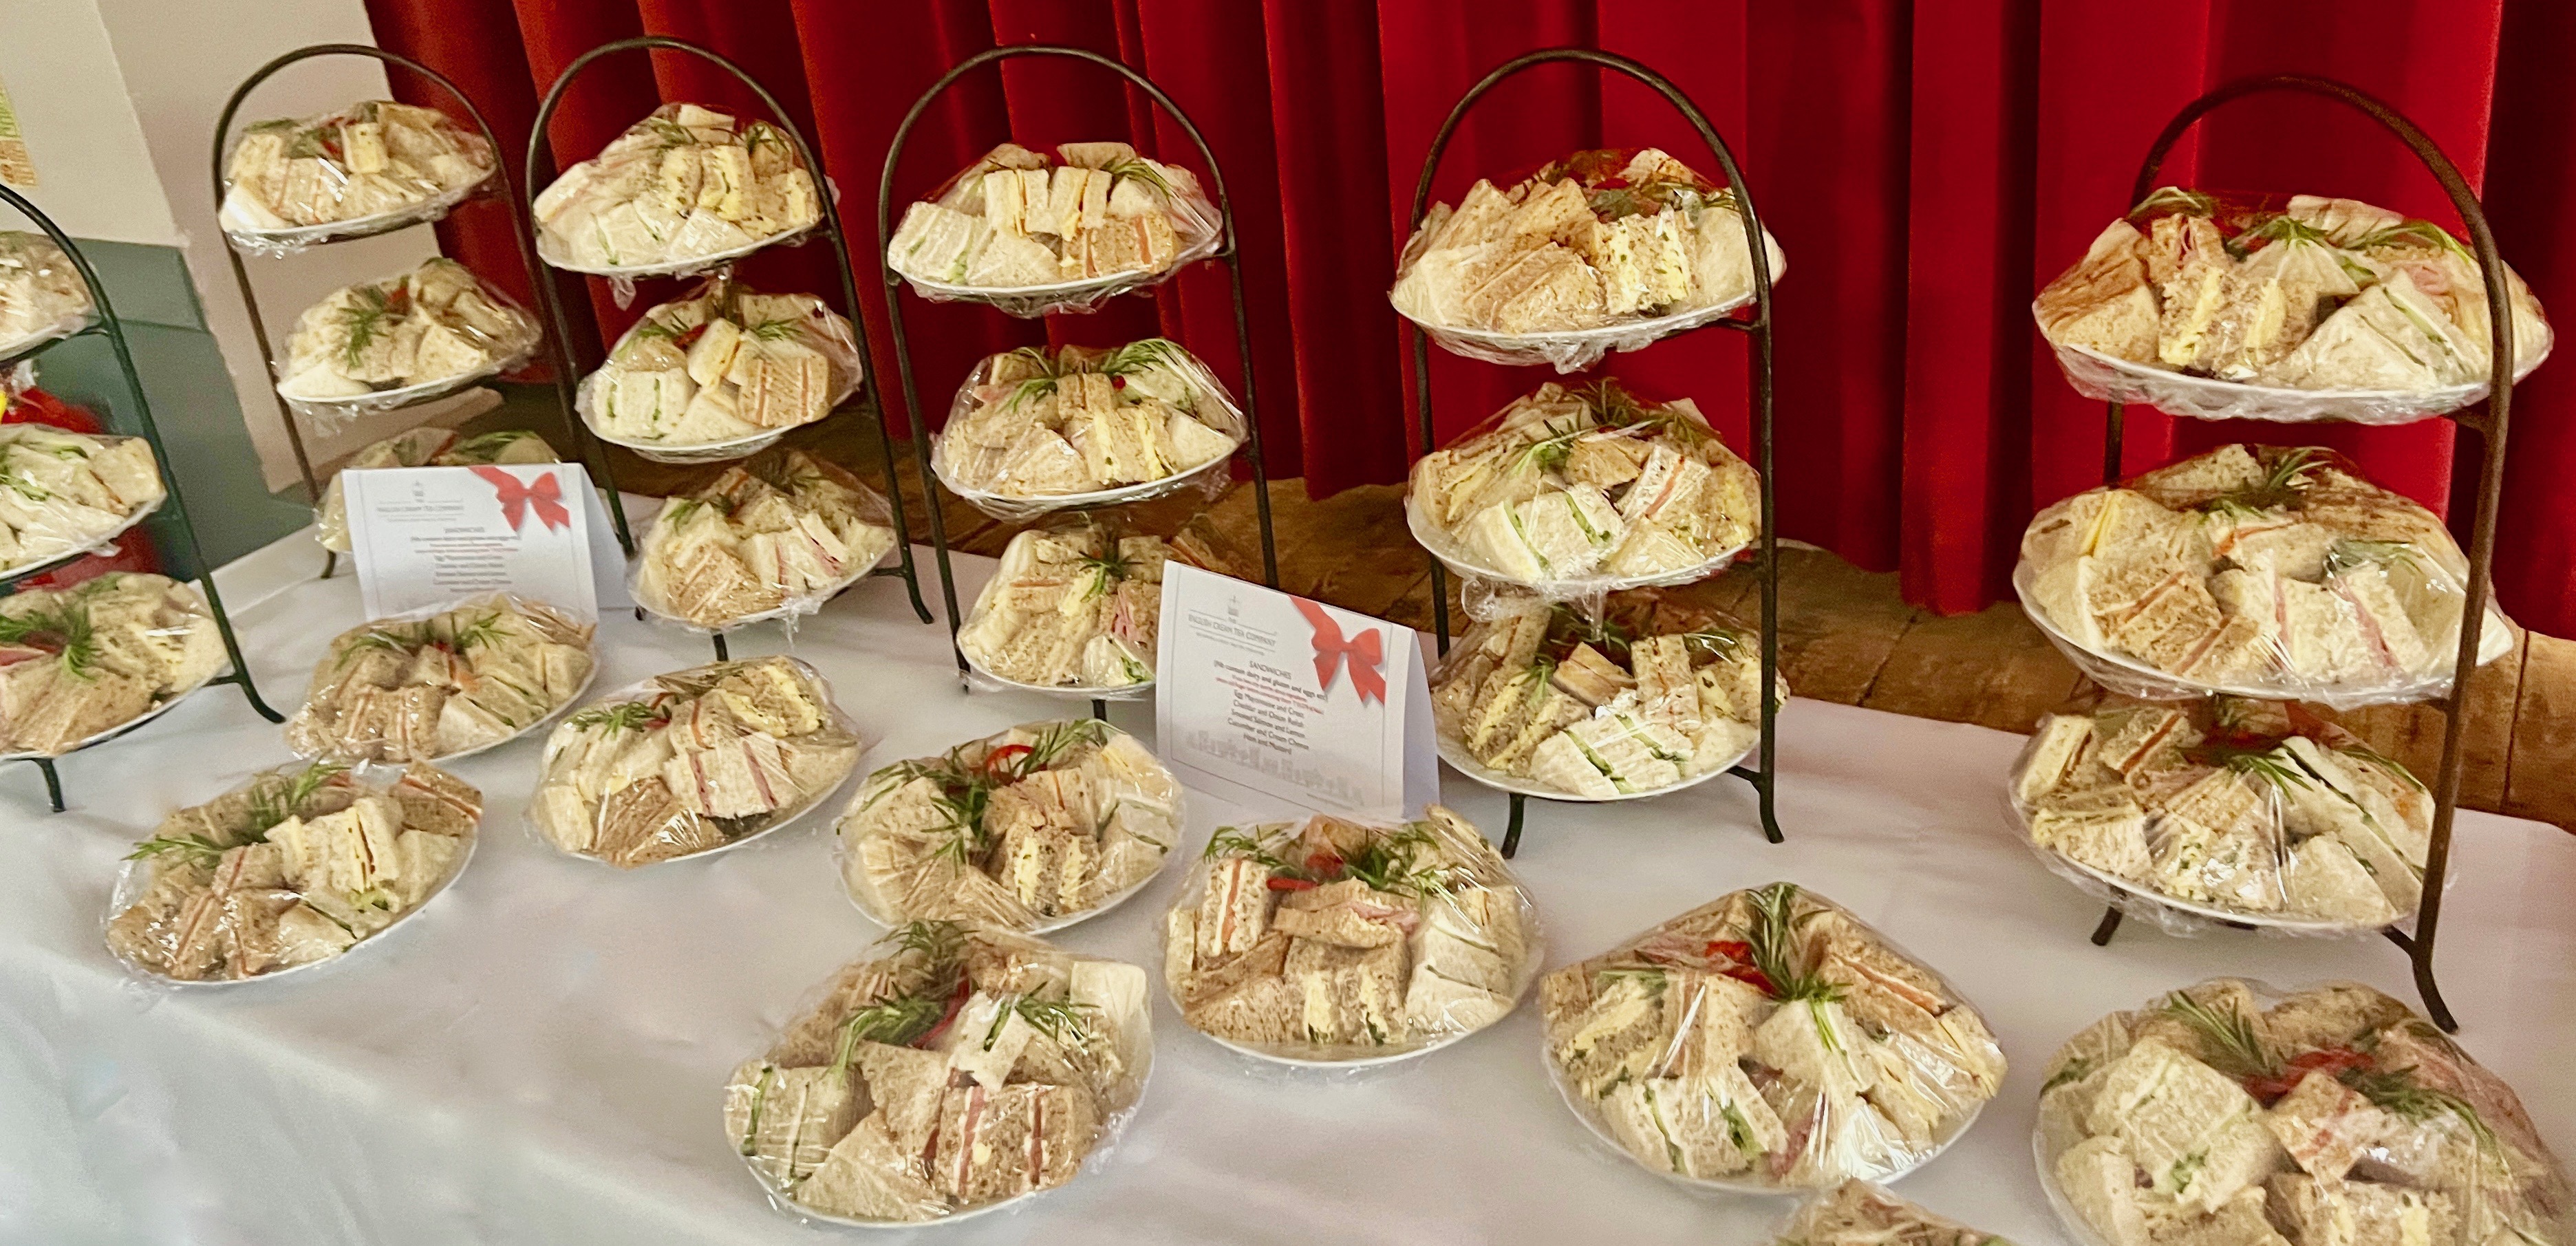 Funeral Finger Food in Villate Hall